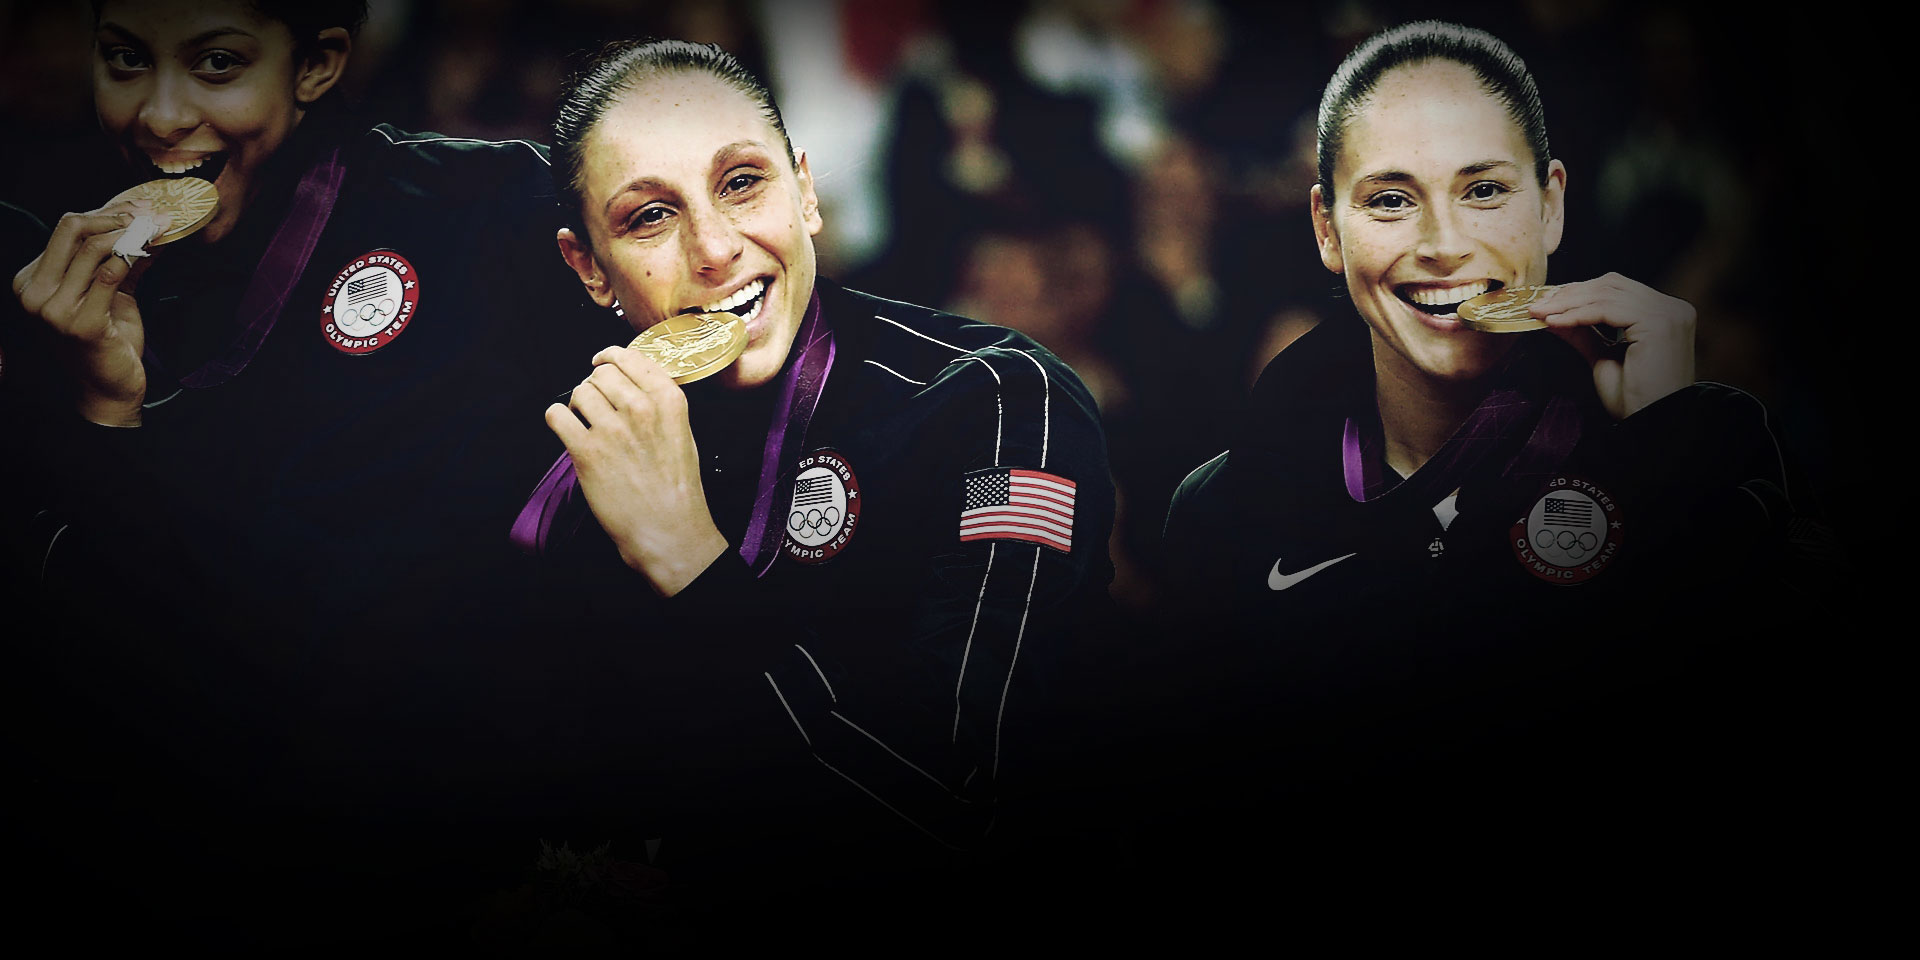 Team USA – 3 Olympic Gold Medals.